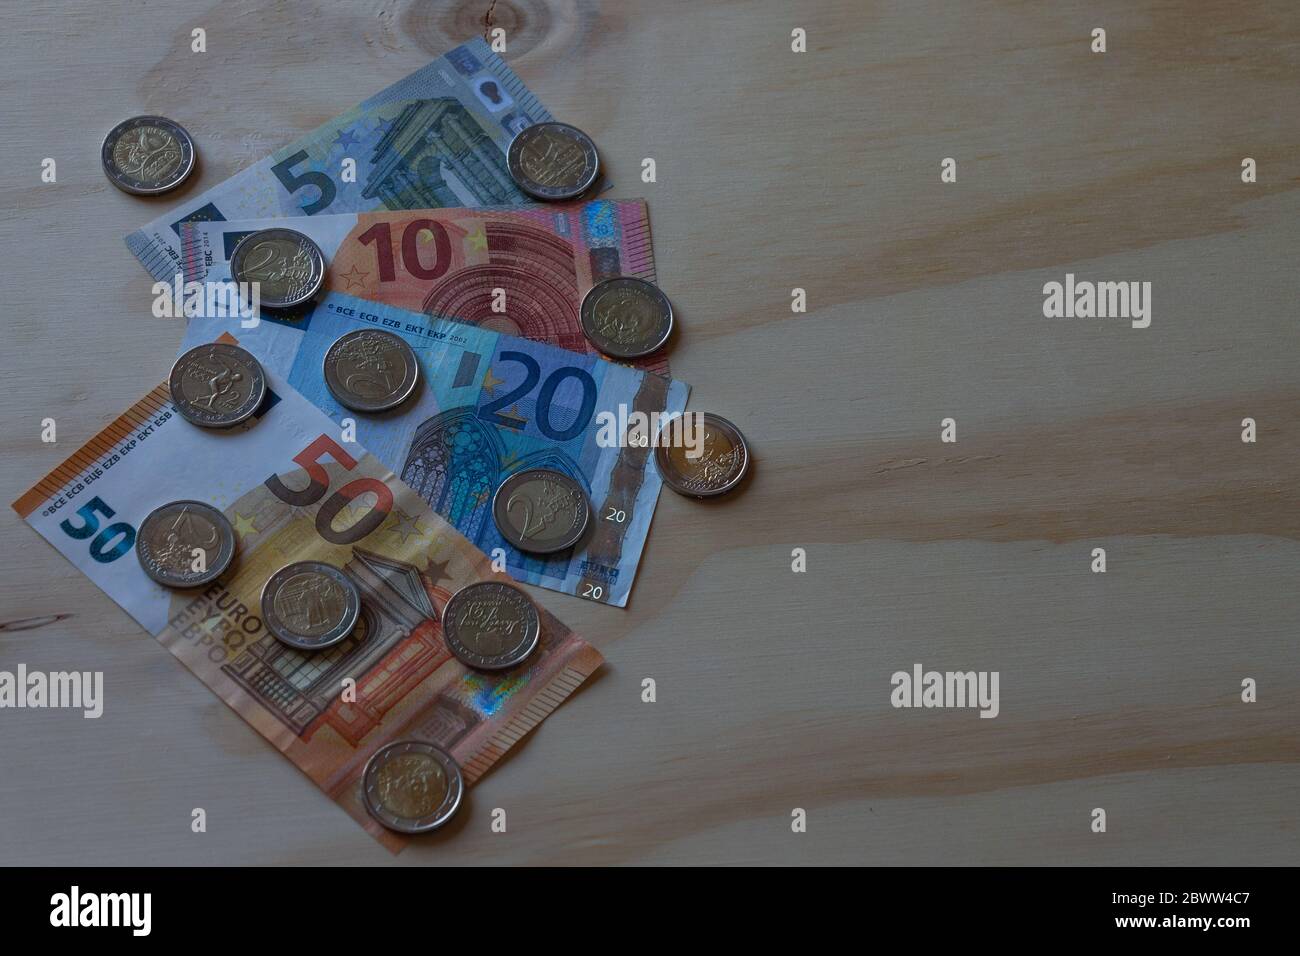 Euro Money banknotes and coins on a table Stock Photo